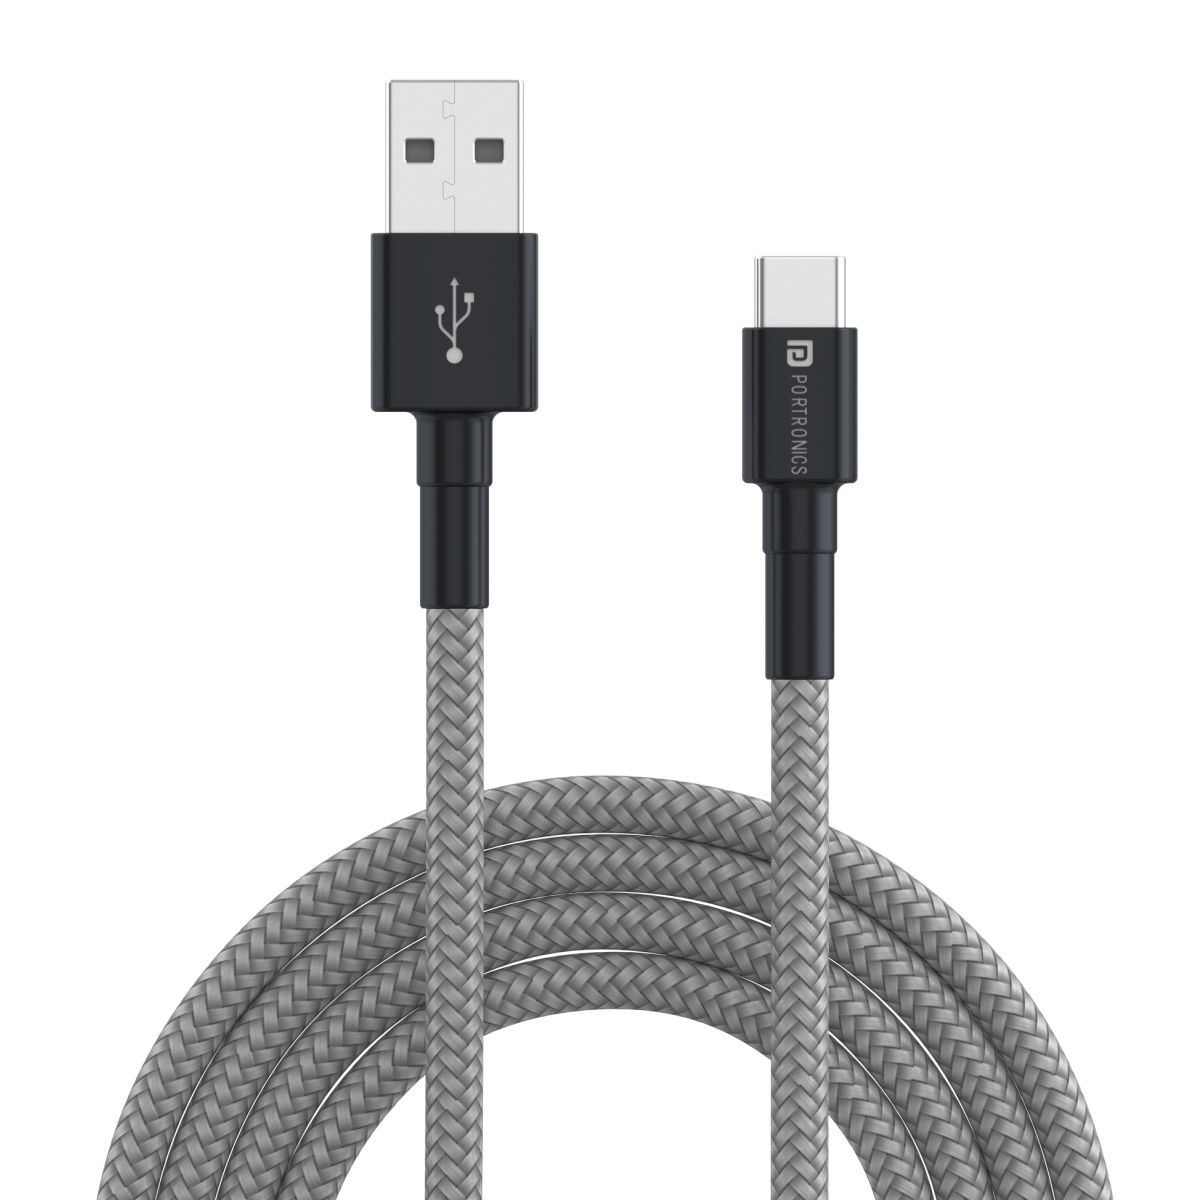 Portronics Konnect B Type C Cable with 3.0A Output, Nylon Braided, Fast Data Sync, 1M Length (Grey)